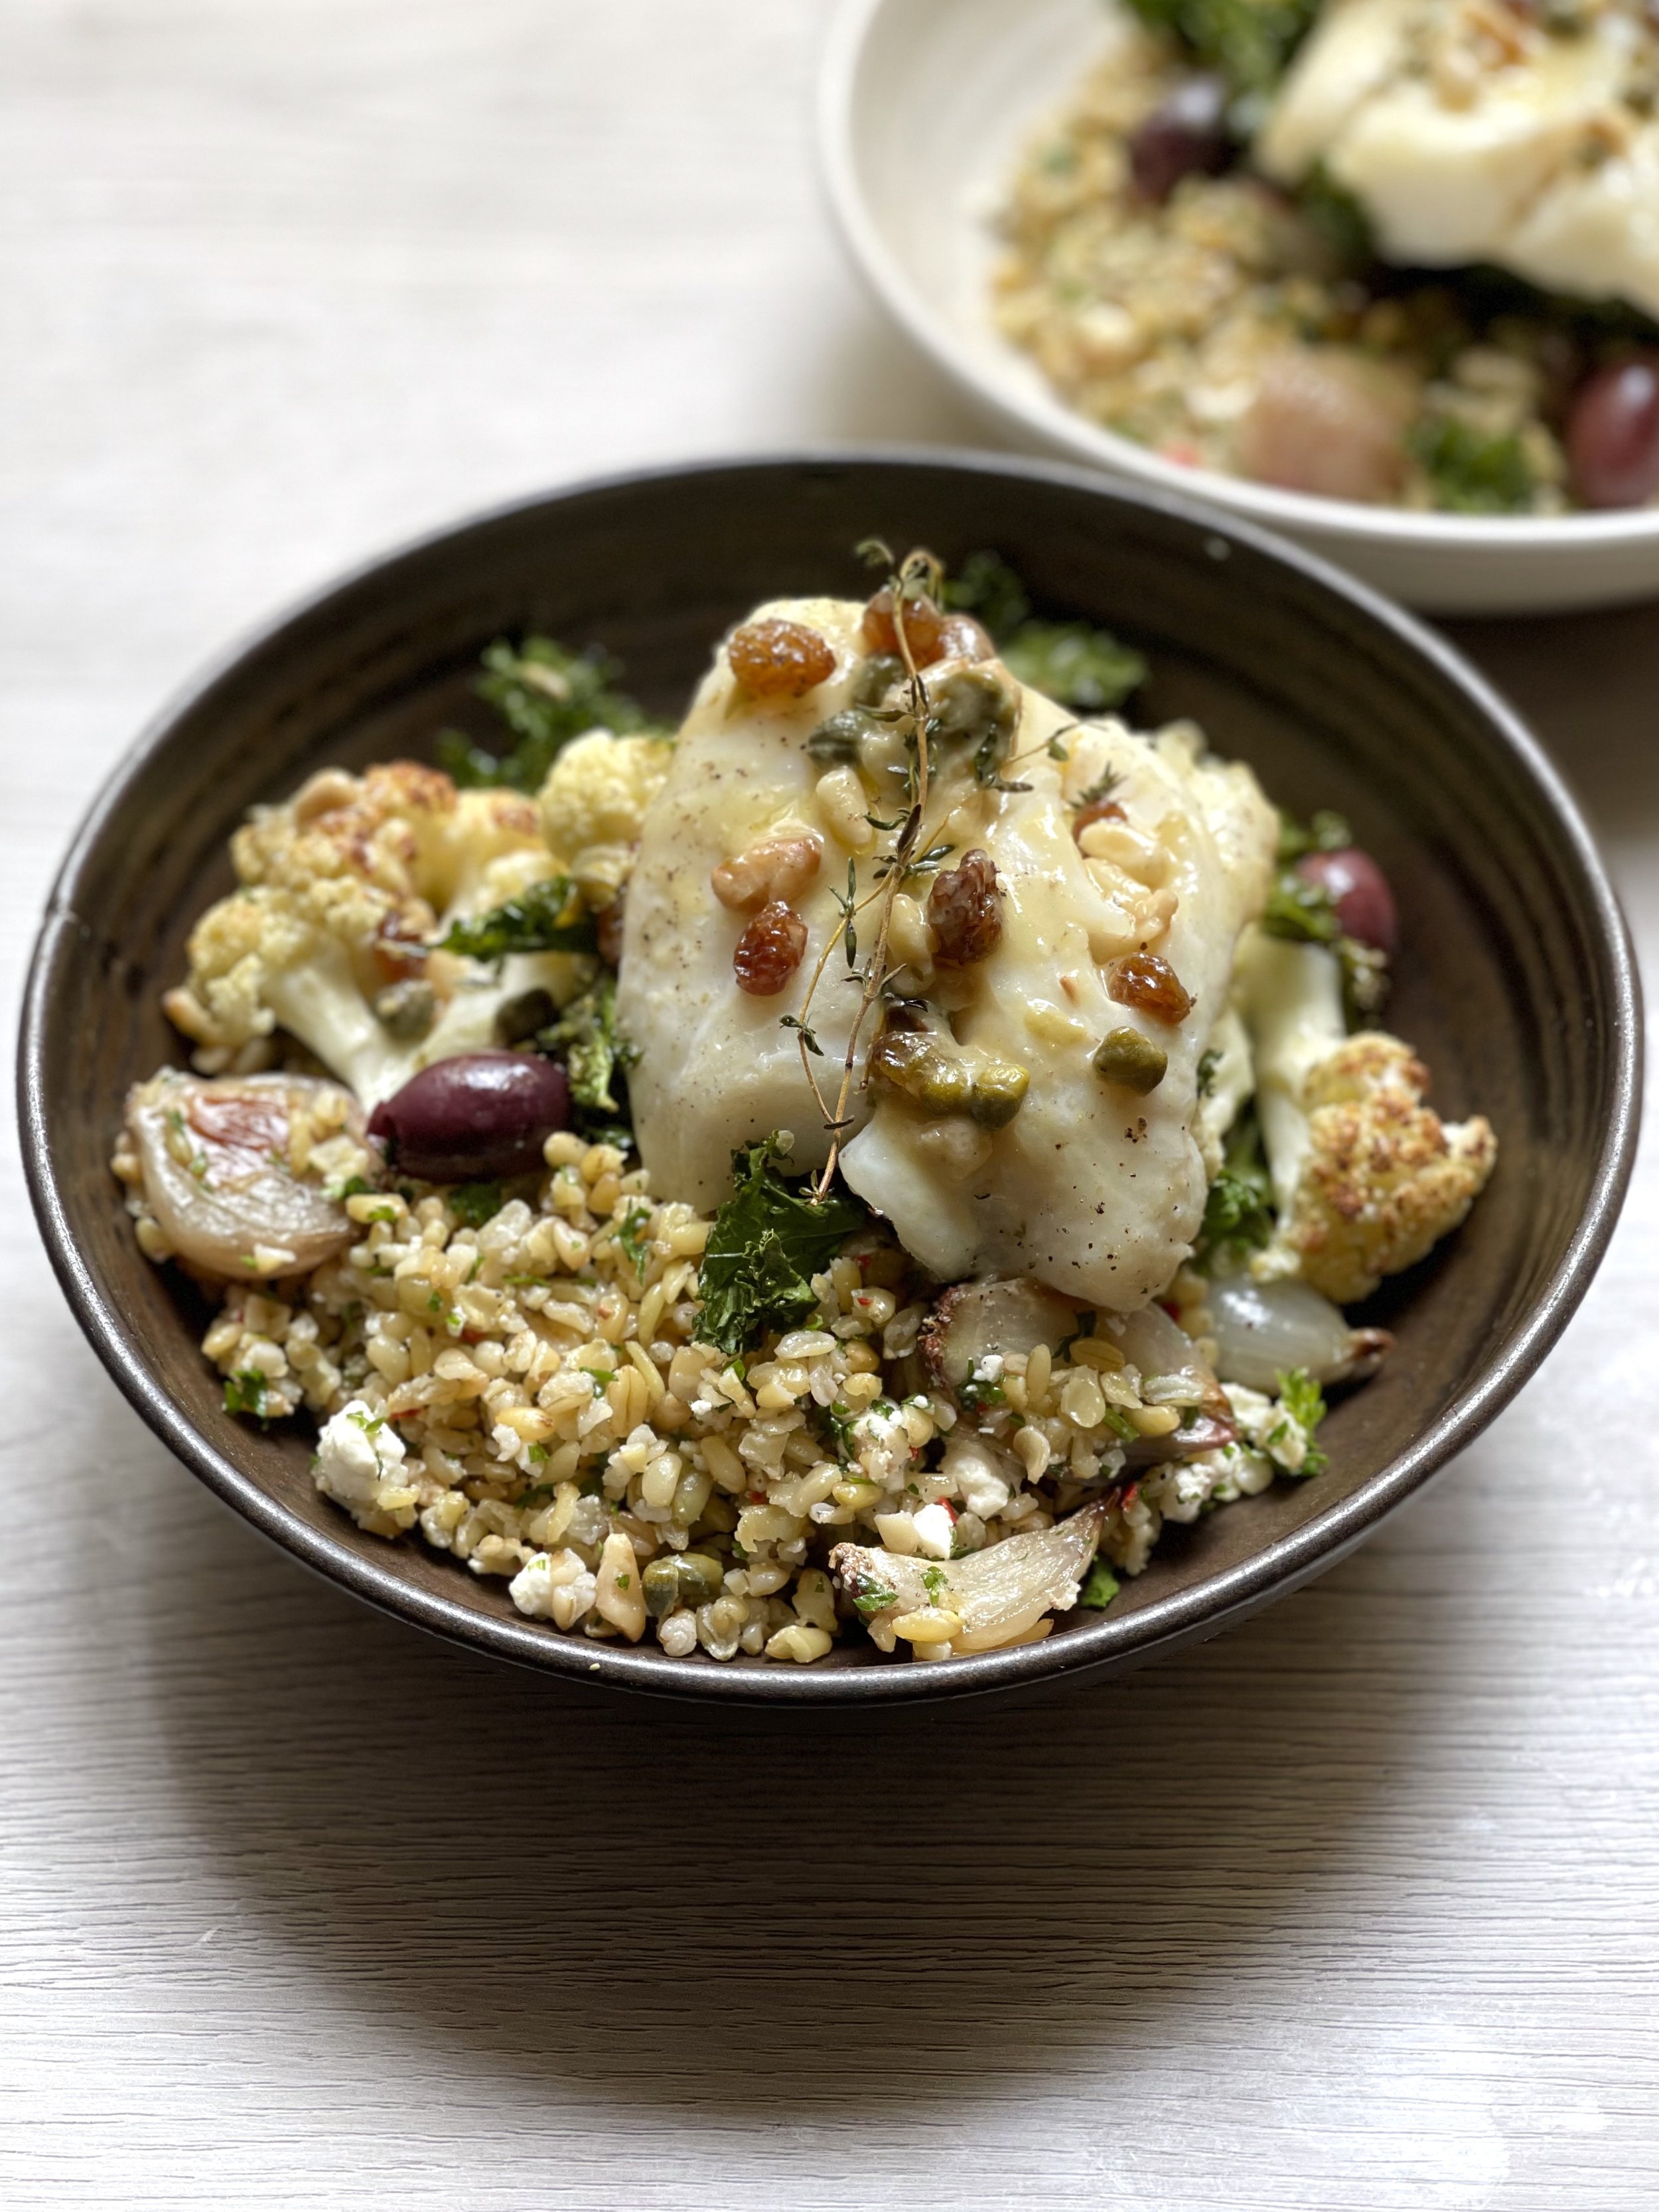 Joey and Katy's roasted cod with kale and cauliflower